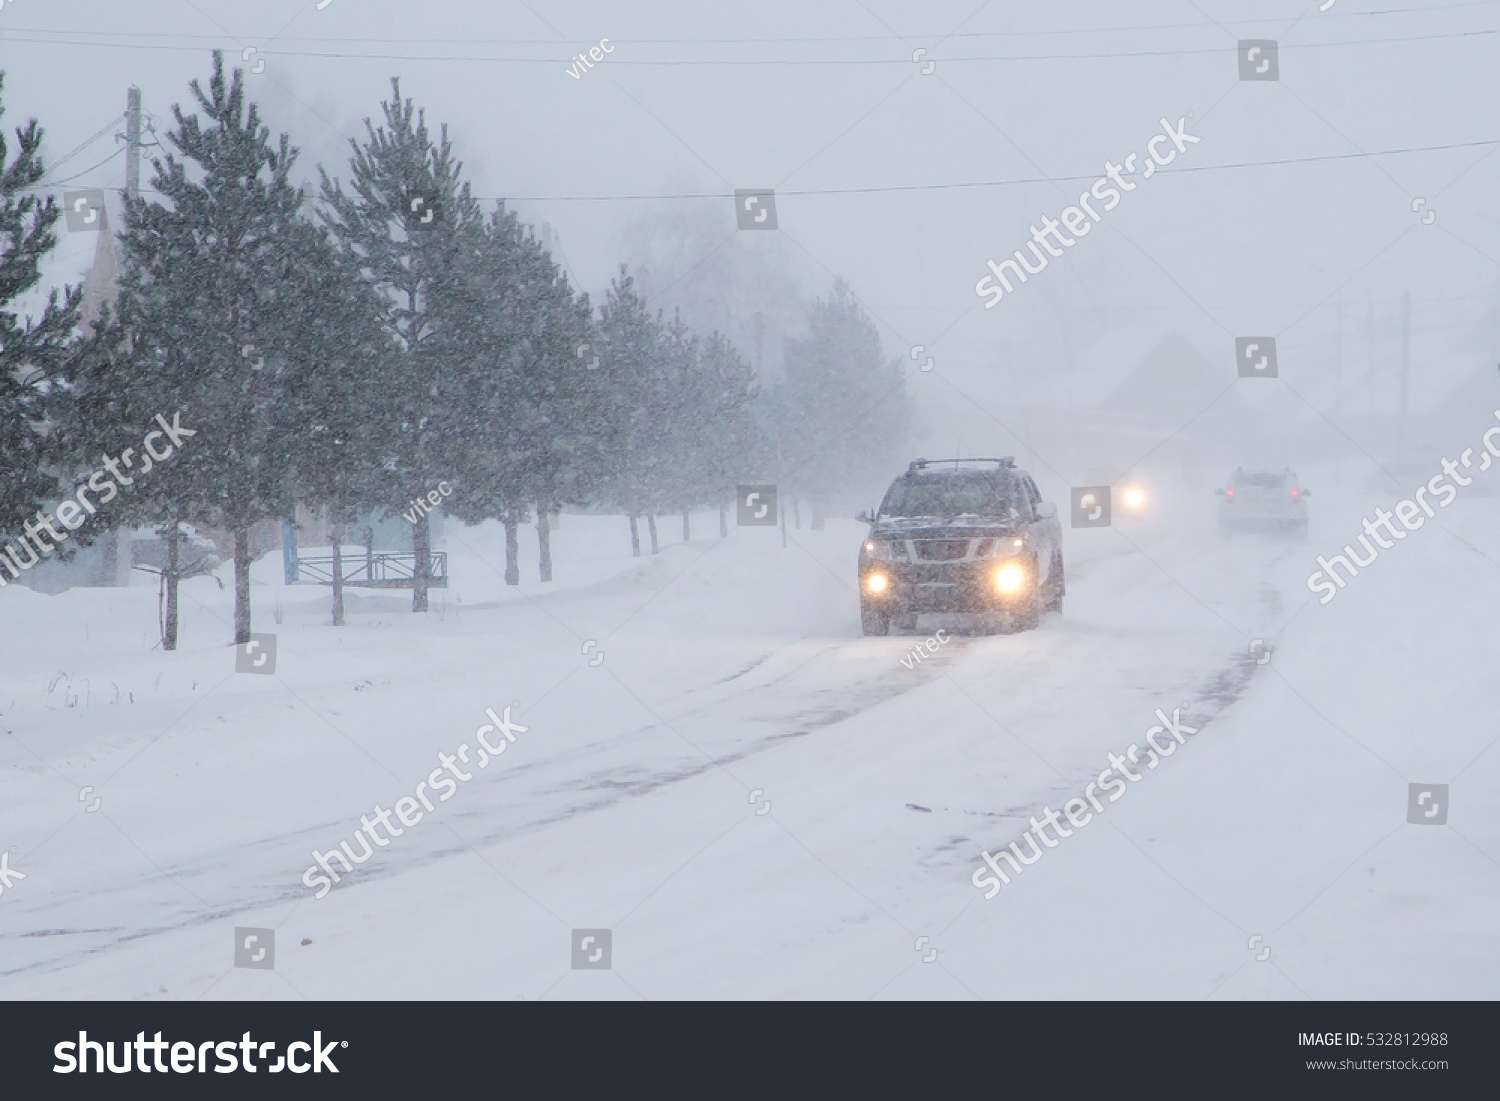 Winter, snow, Blizzard, poor visibility on the road. Car during a Blizzard on the road with the headlights.

 #532812988